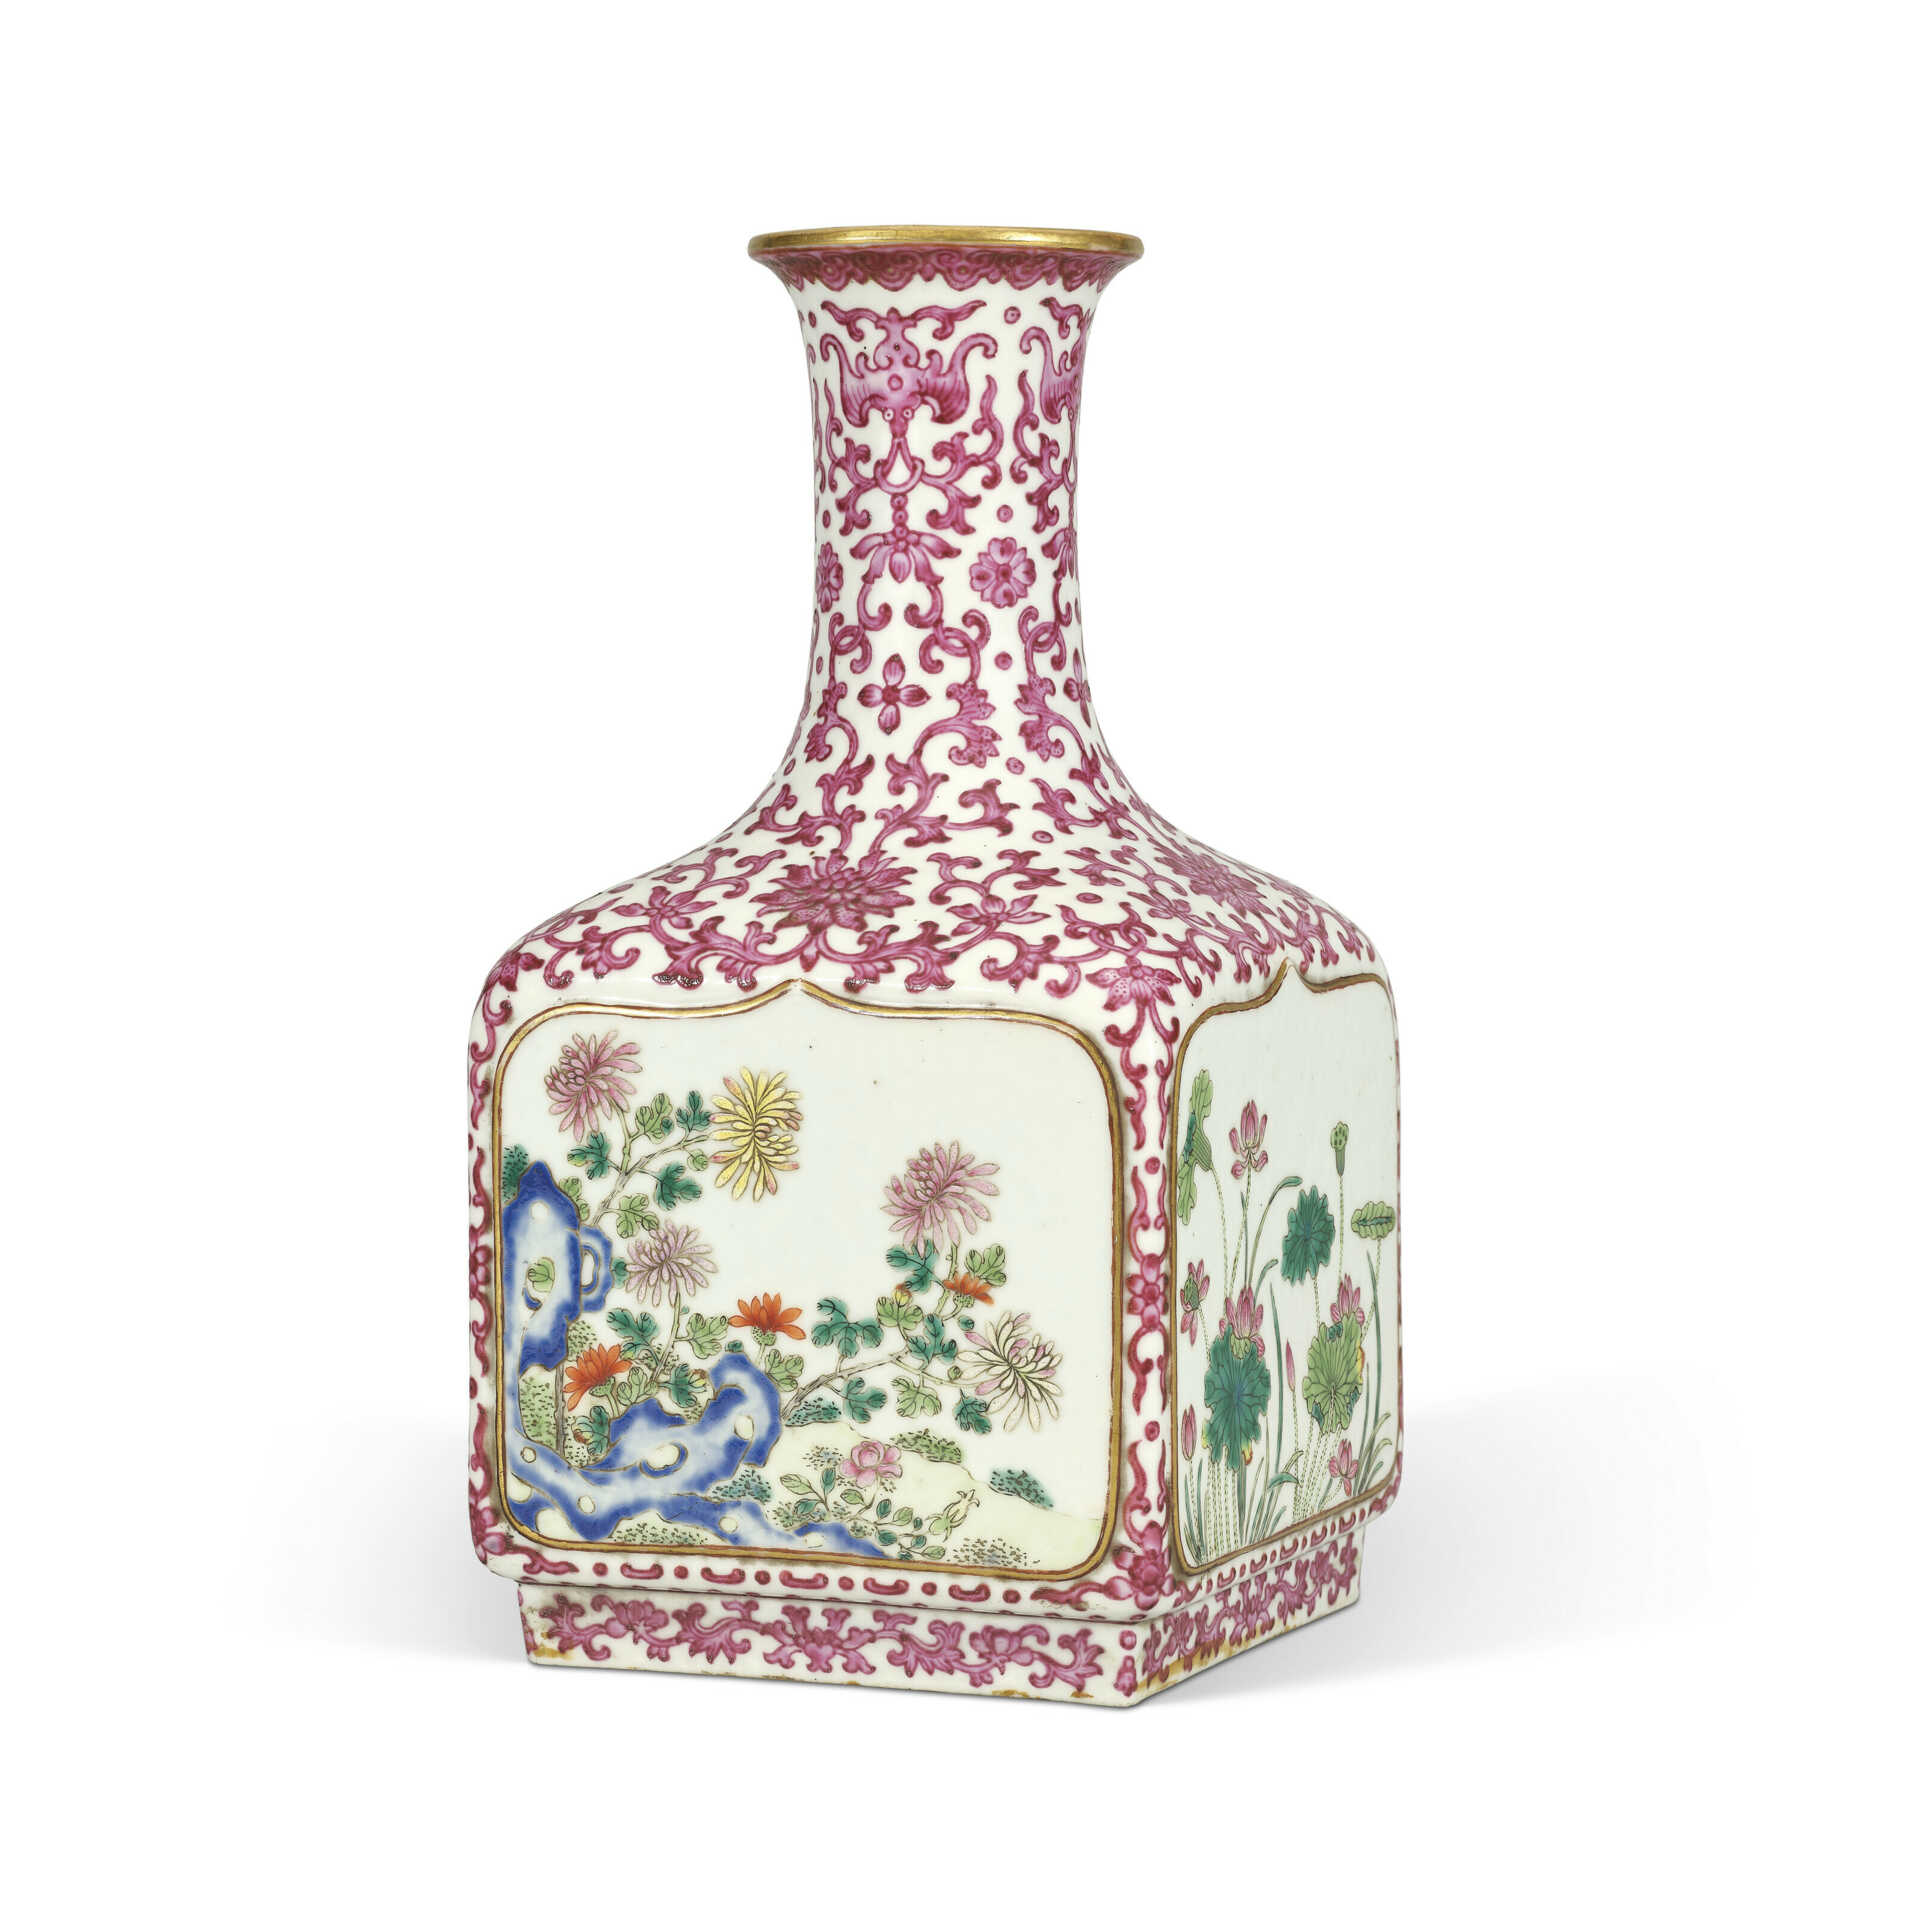 A VERY RARE FAMILLE ROSE ‘FLOWERS OF THE FOUR SEASONS’ RUBY-ENAMEL-DECORATED SQUARE VASE